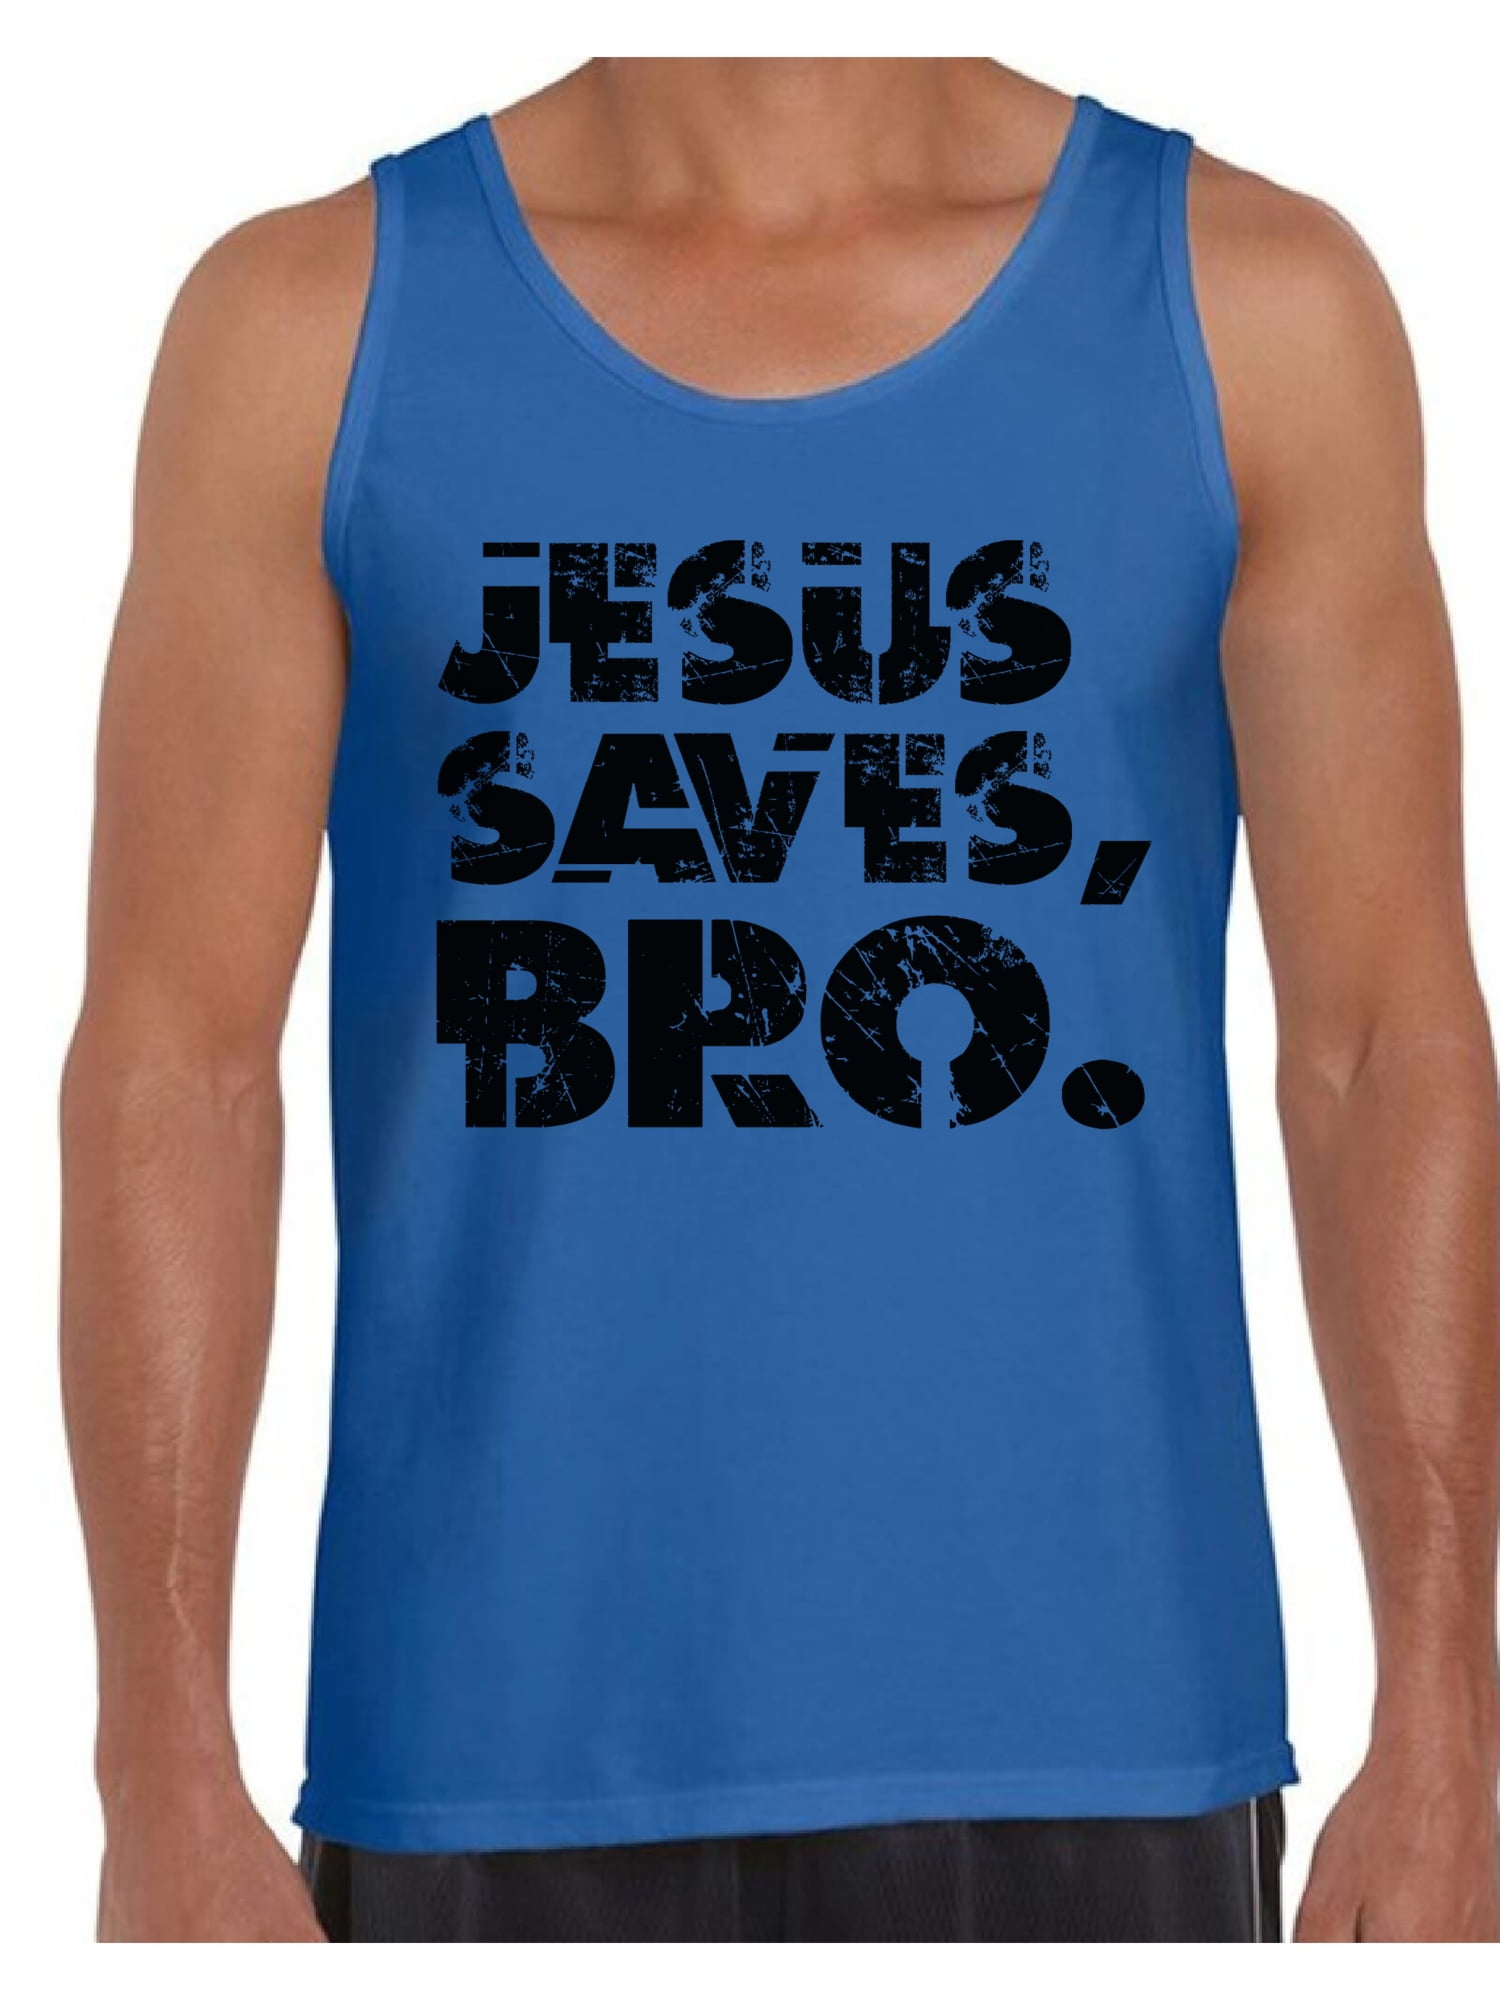 scheerapparaat Verouderd hop Awkward Styles Jesus Saves Tank Top Shirt for Men Black Mens Tanks Clothes  for Men Jesus Christ is the Lord Christian Birthday Gifts Ideas Jesus  Shirts Jesus Clothing Jesus Saves Bro Mens